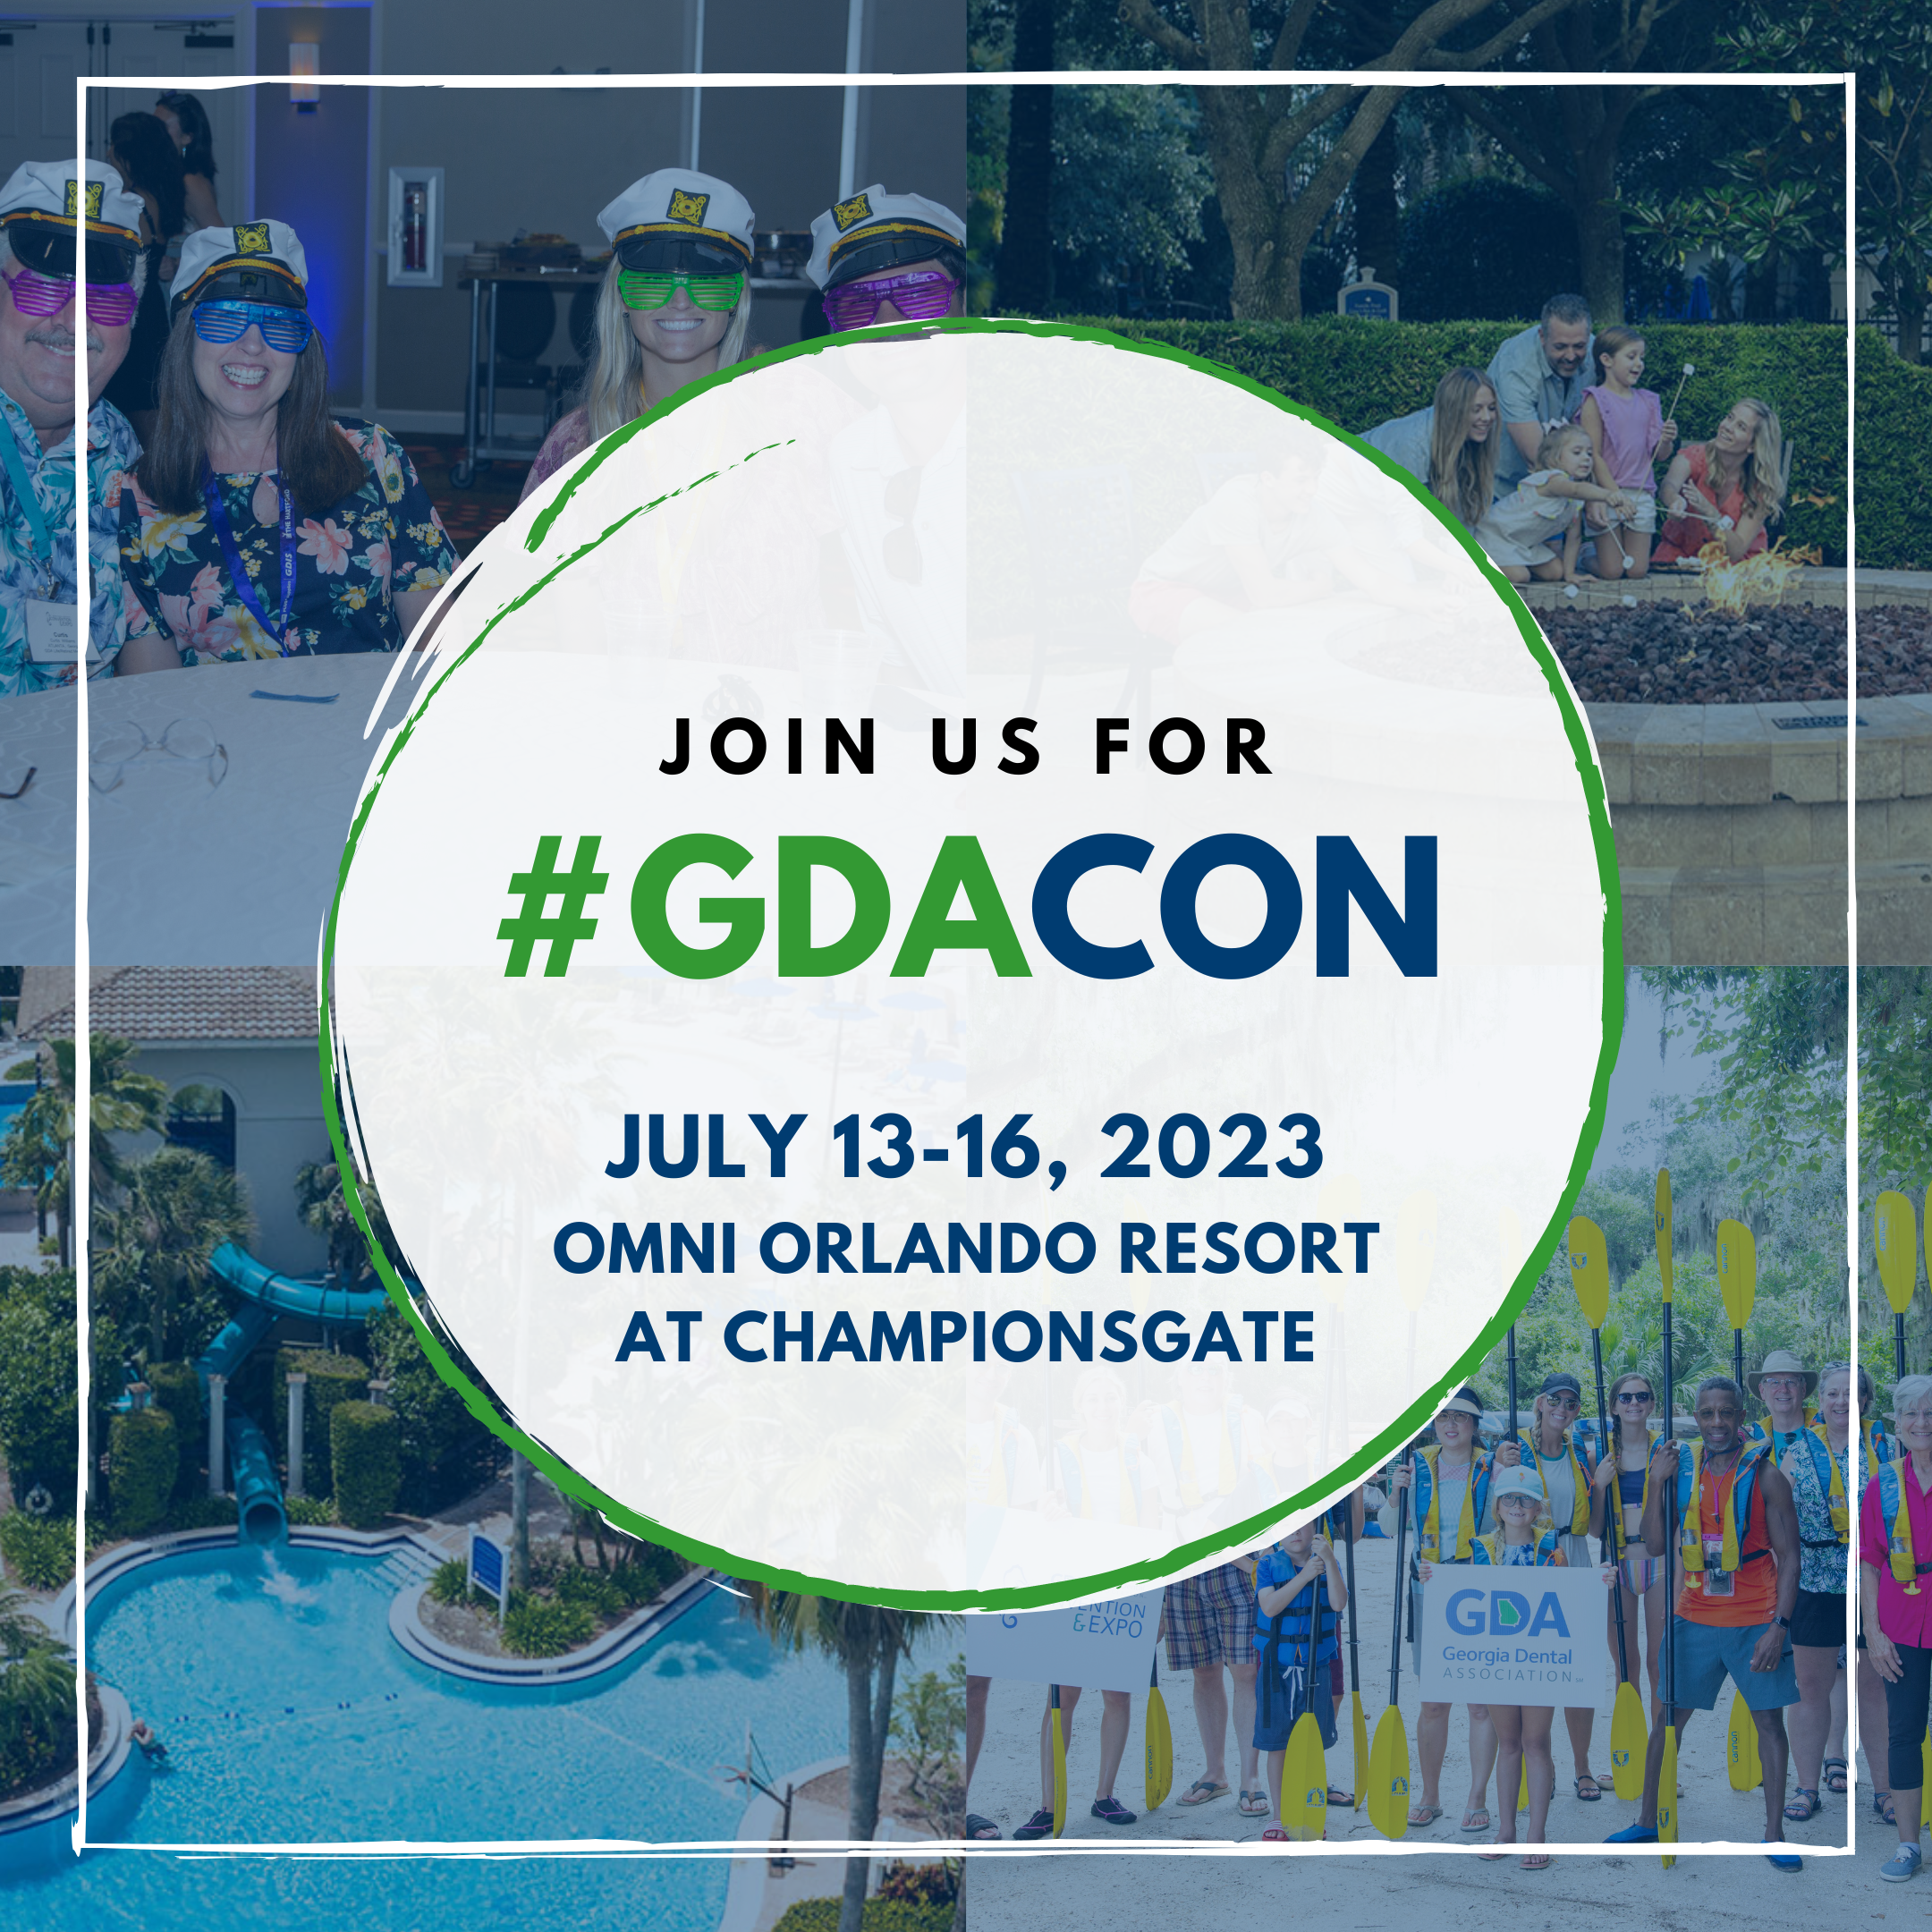 Join us for #GDACON